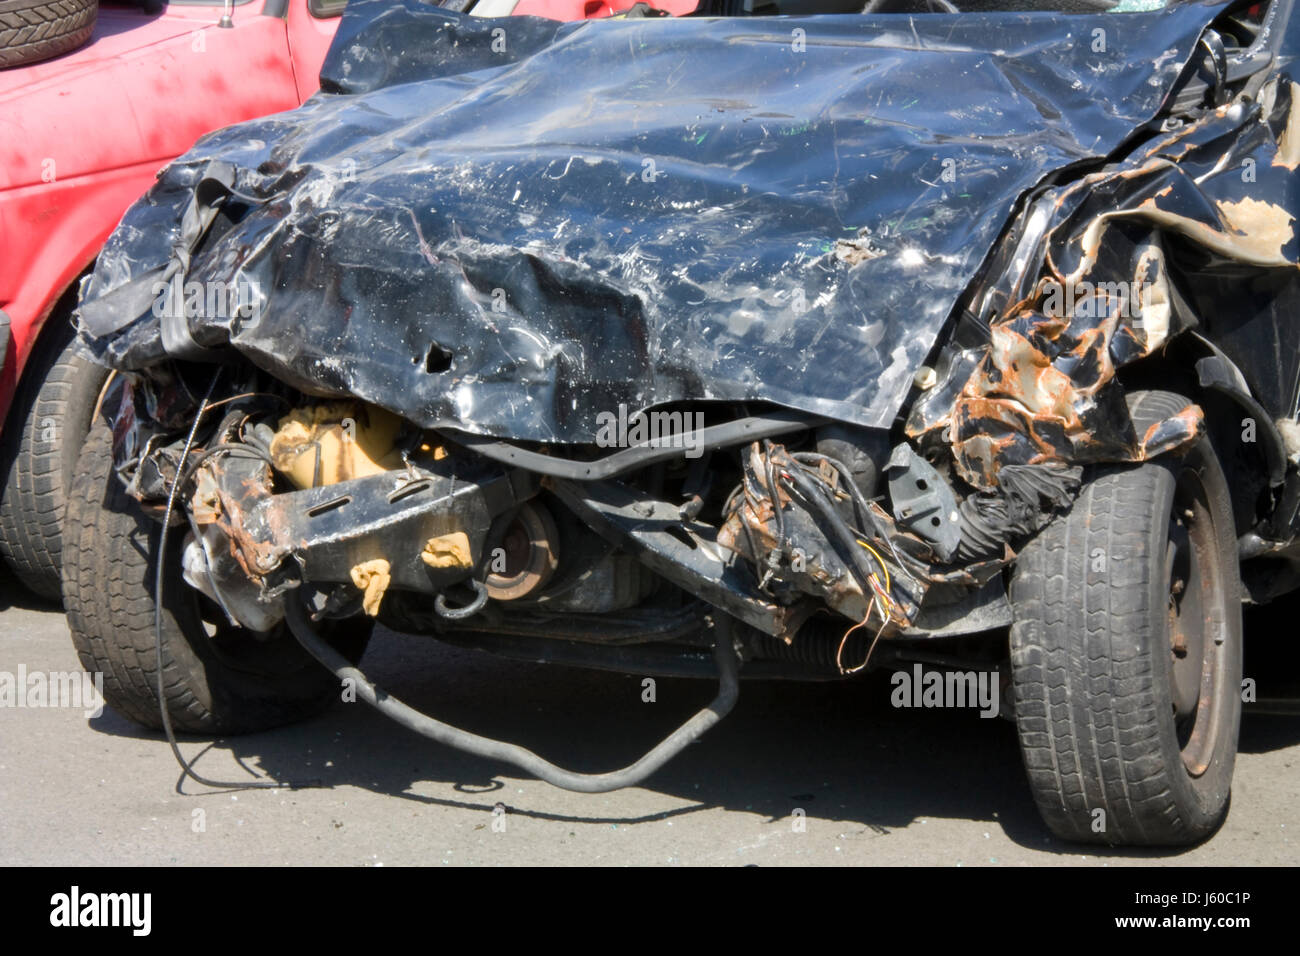 car automobile vehicle means of travel motor vehicle total loss scrap wrecks Stock Photo